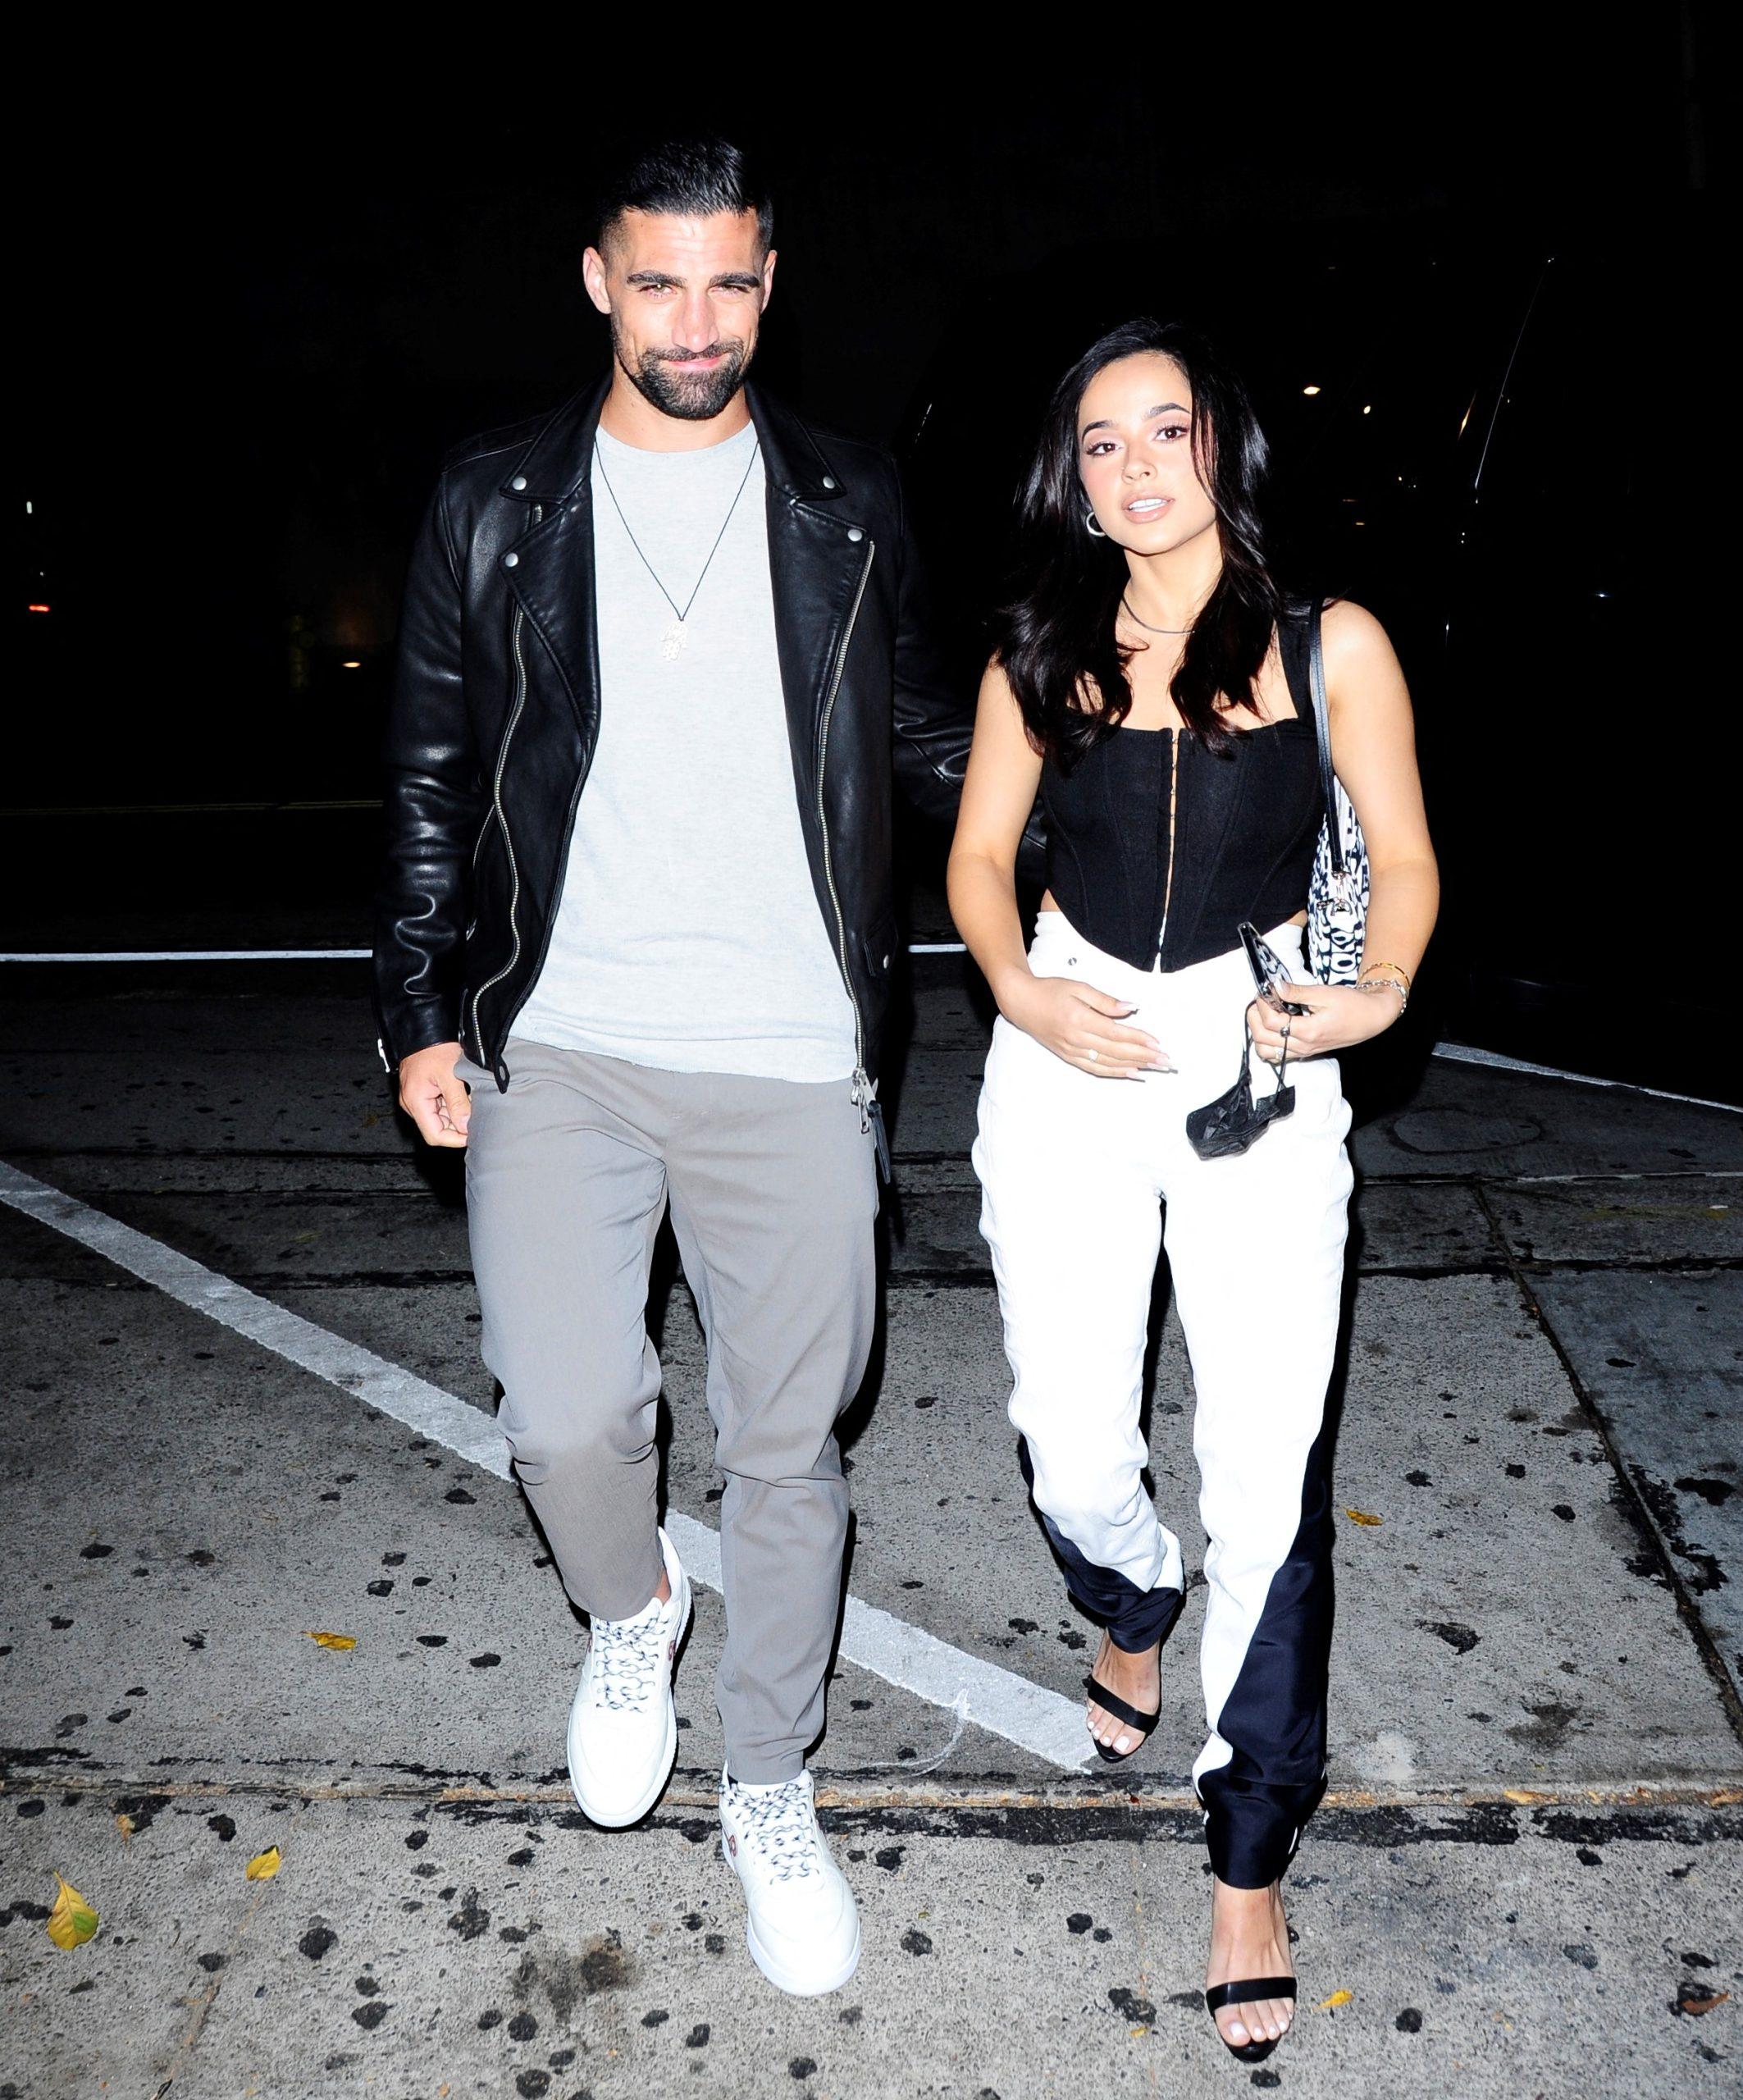 Becky G Spotted Without Her Engagement Ring Amid Cheating Allegations Against Her Fiancé Sebastian Lletget